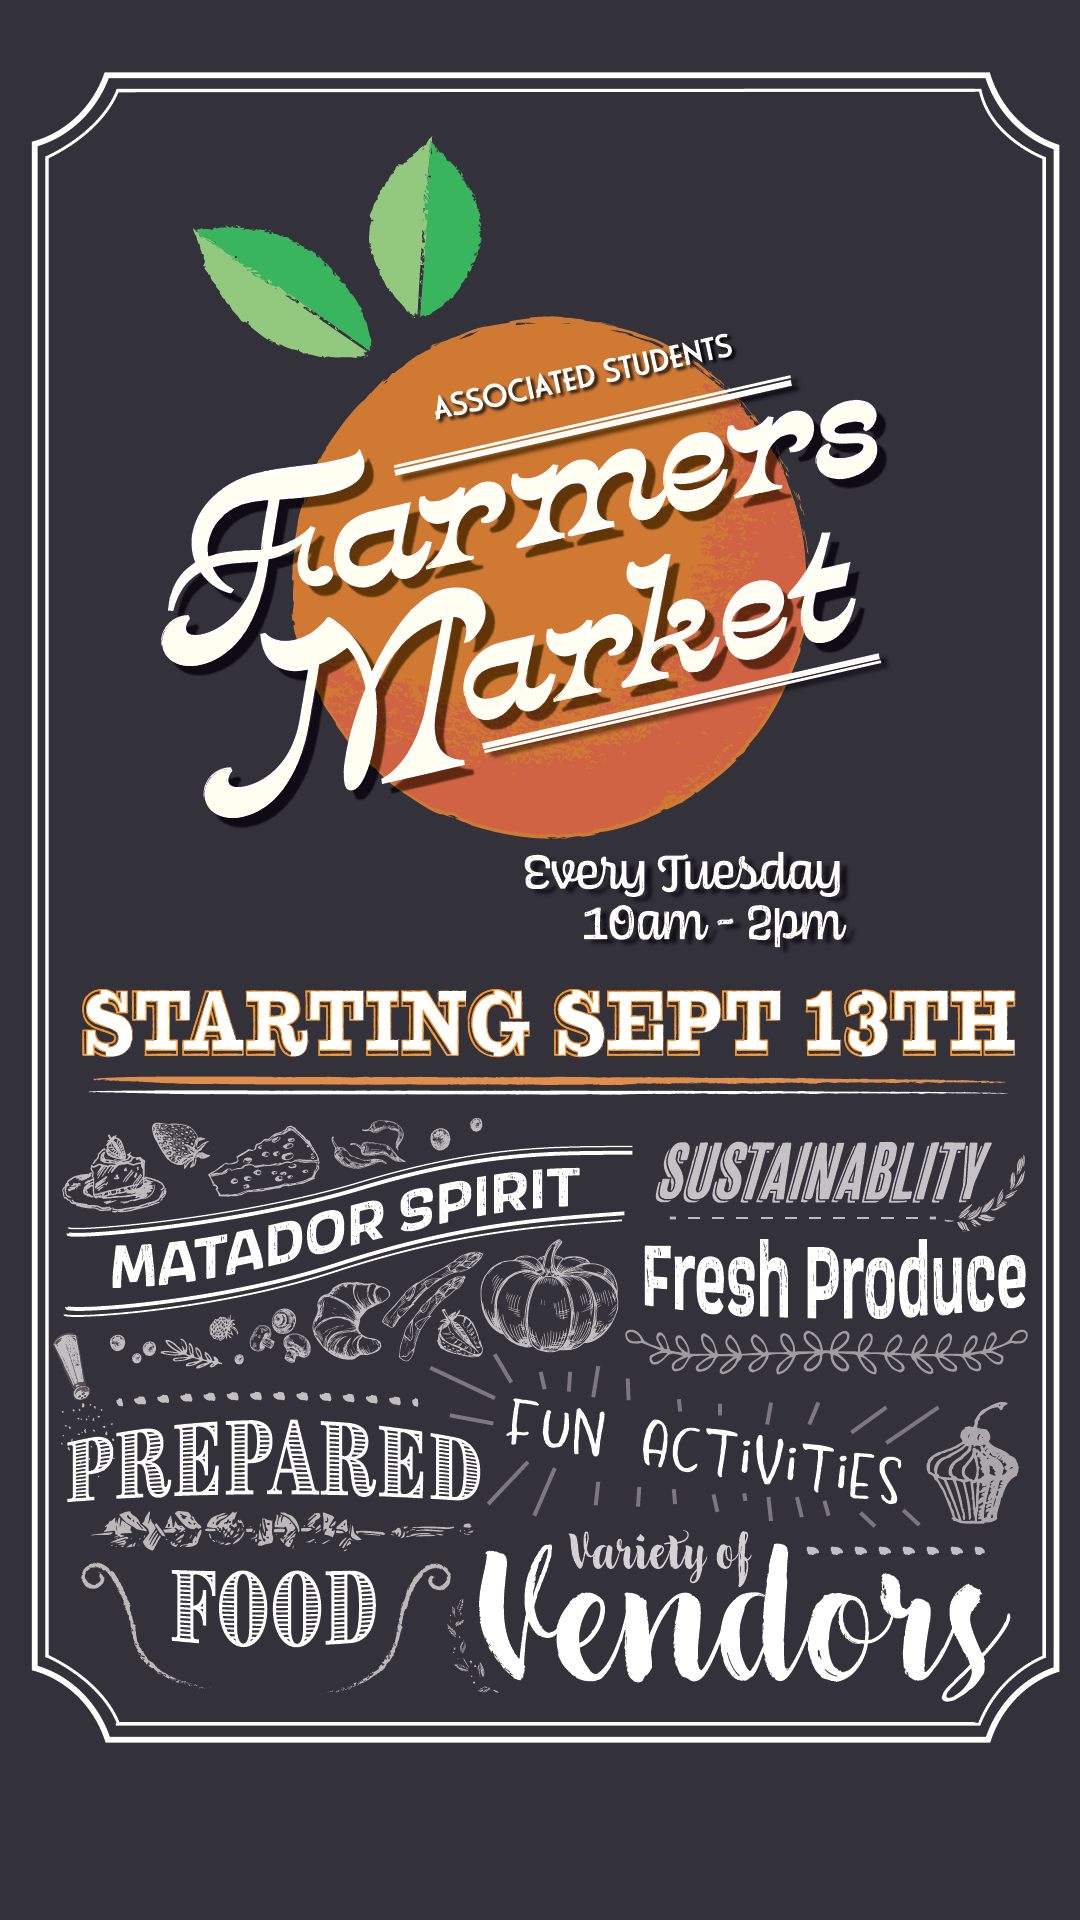 Farmers Market every tuesday 10am to 2pm starting september 13